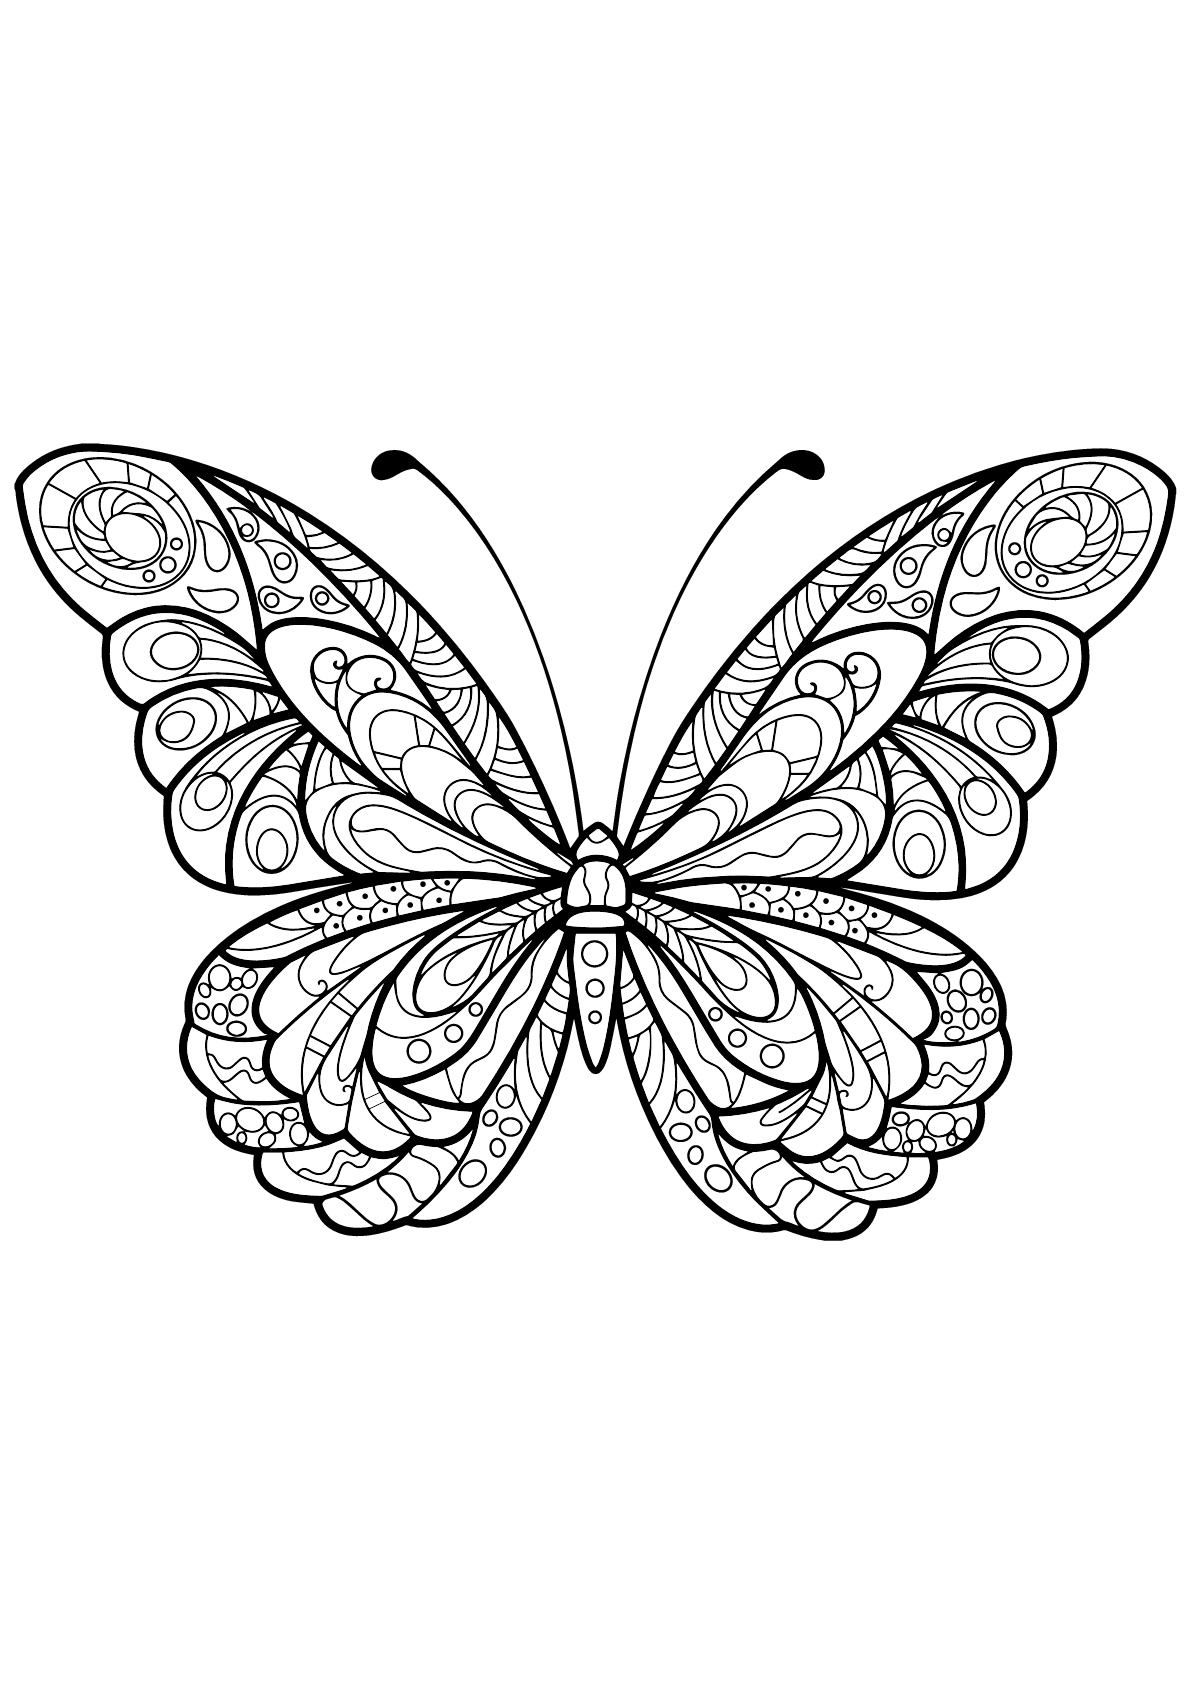 Butterfly beautiful patterns - 5 - Butterflies & insects Adult Coloring ...